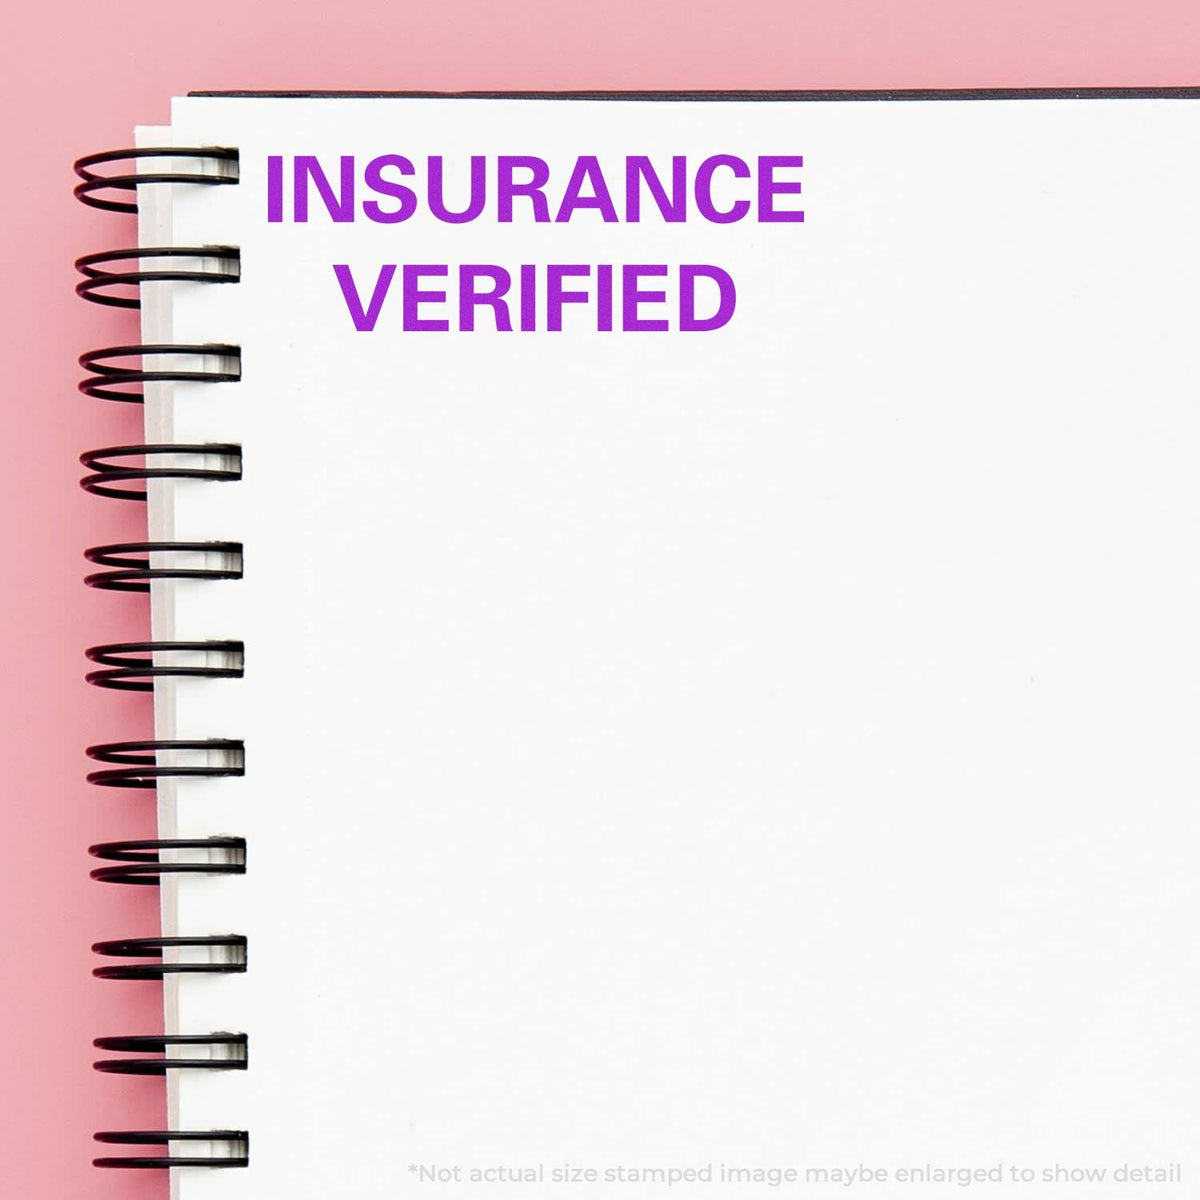 In Use Self-Inking Insurance Verified Stamp Image